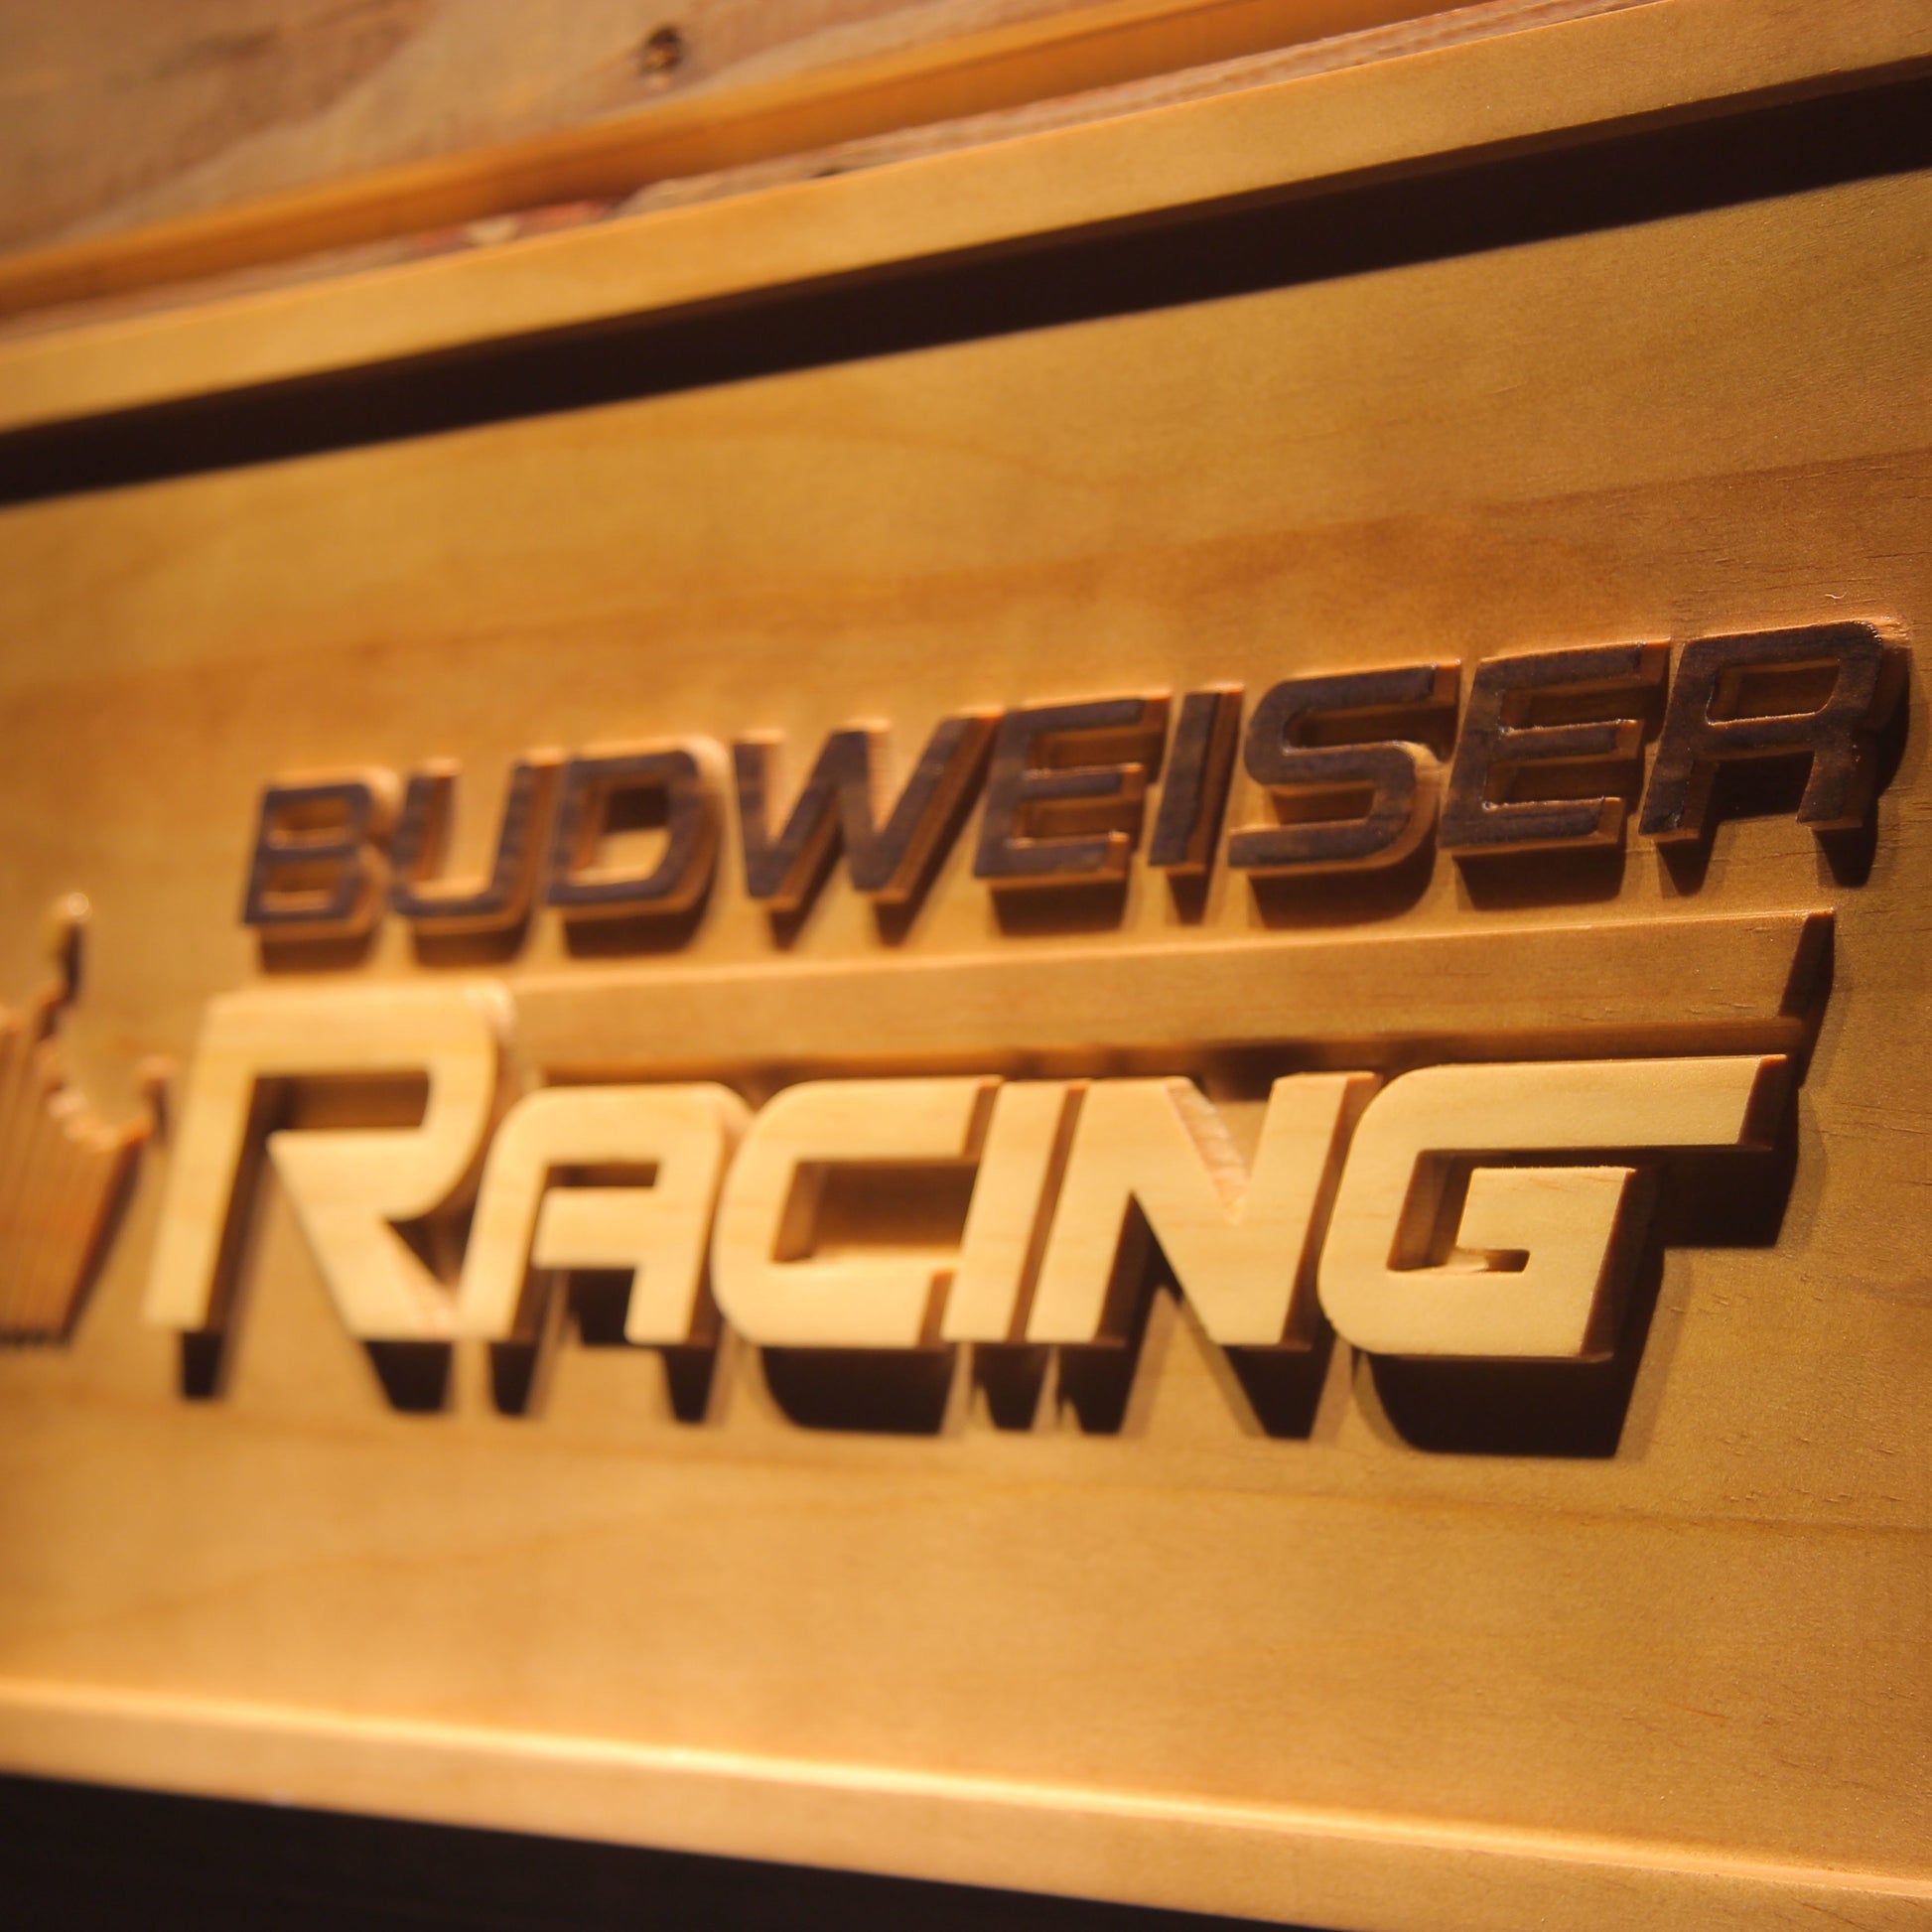 Budweiser Racing Car 3D Wooden Bar Signs by Woody Signs Co. - Handmade Crafted Unique Wooden Creative